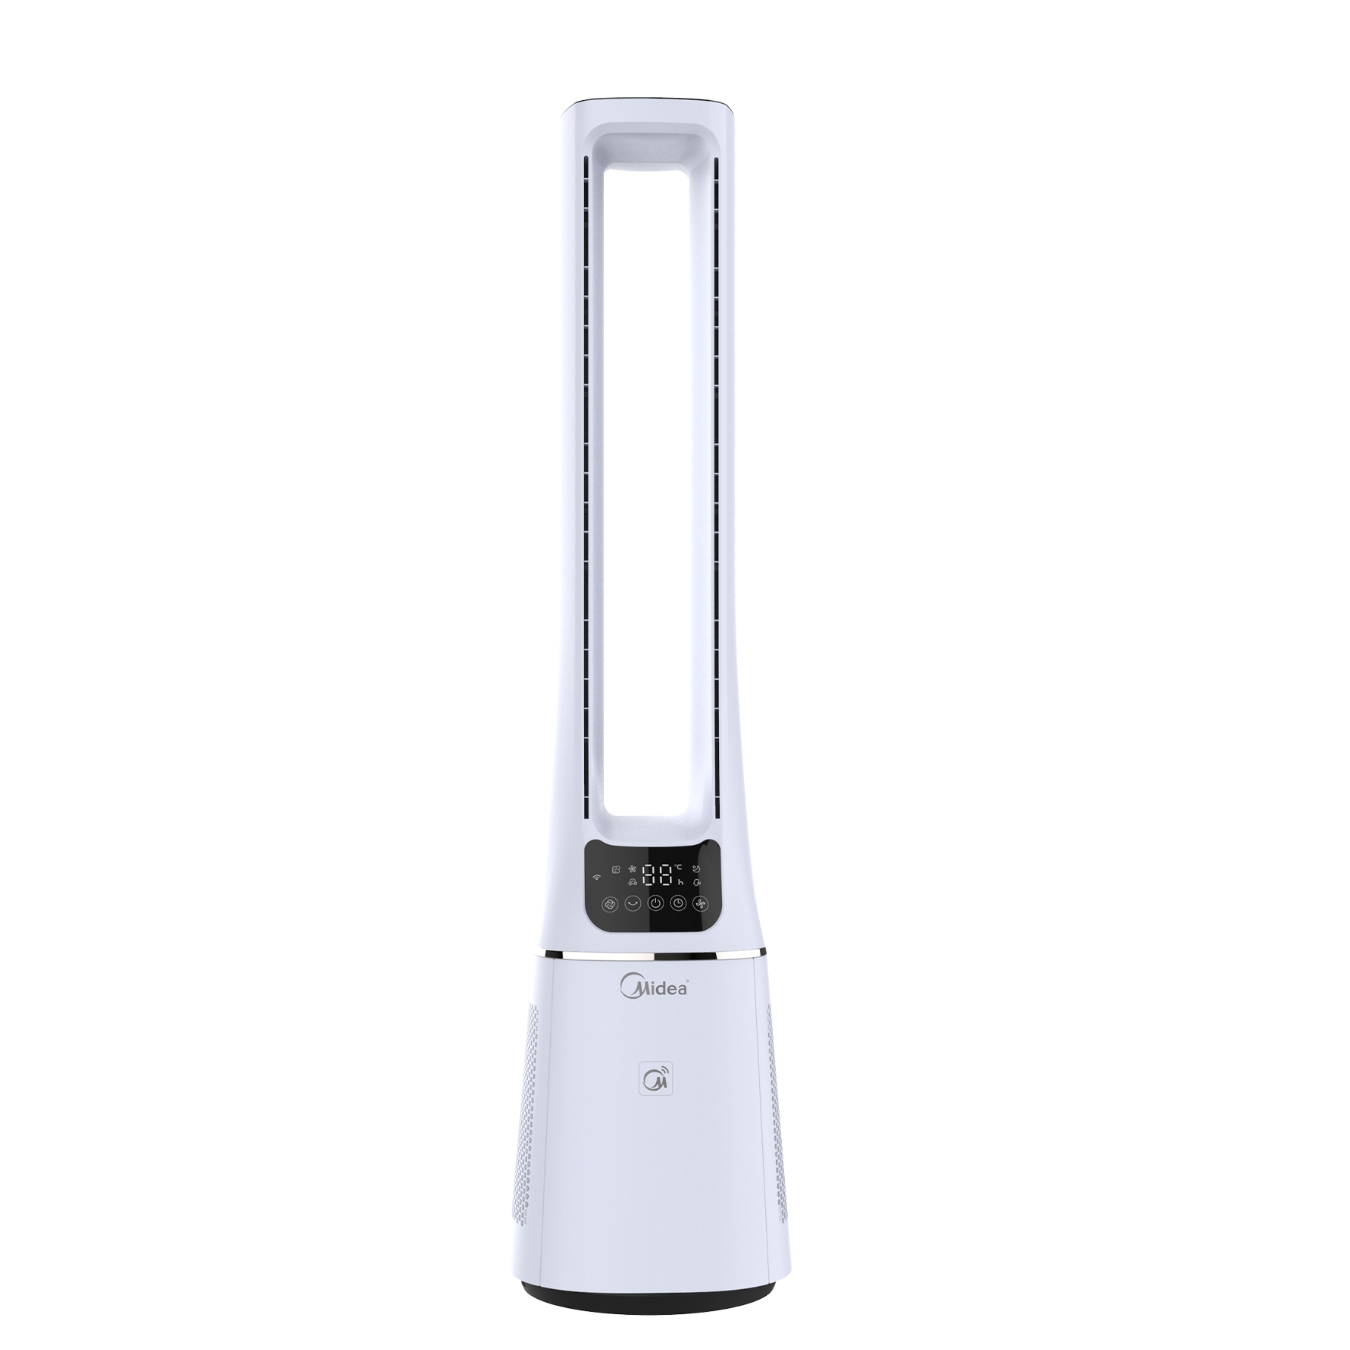 View SmartAir Bladeless Fan 36 Cool Purify Bladeless Tower Fan Control With Free App High Street TV information